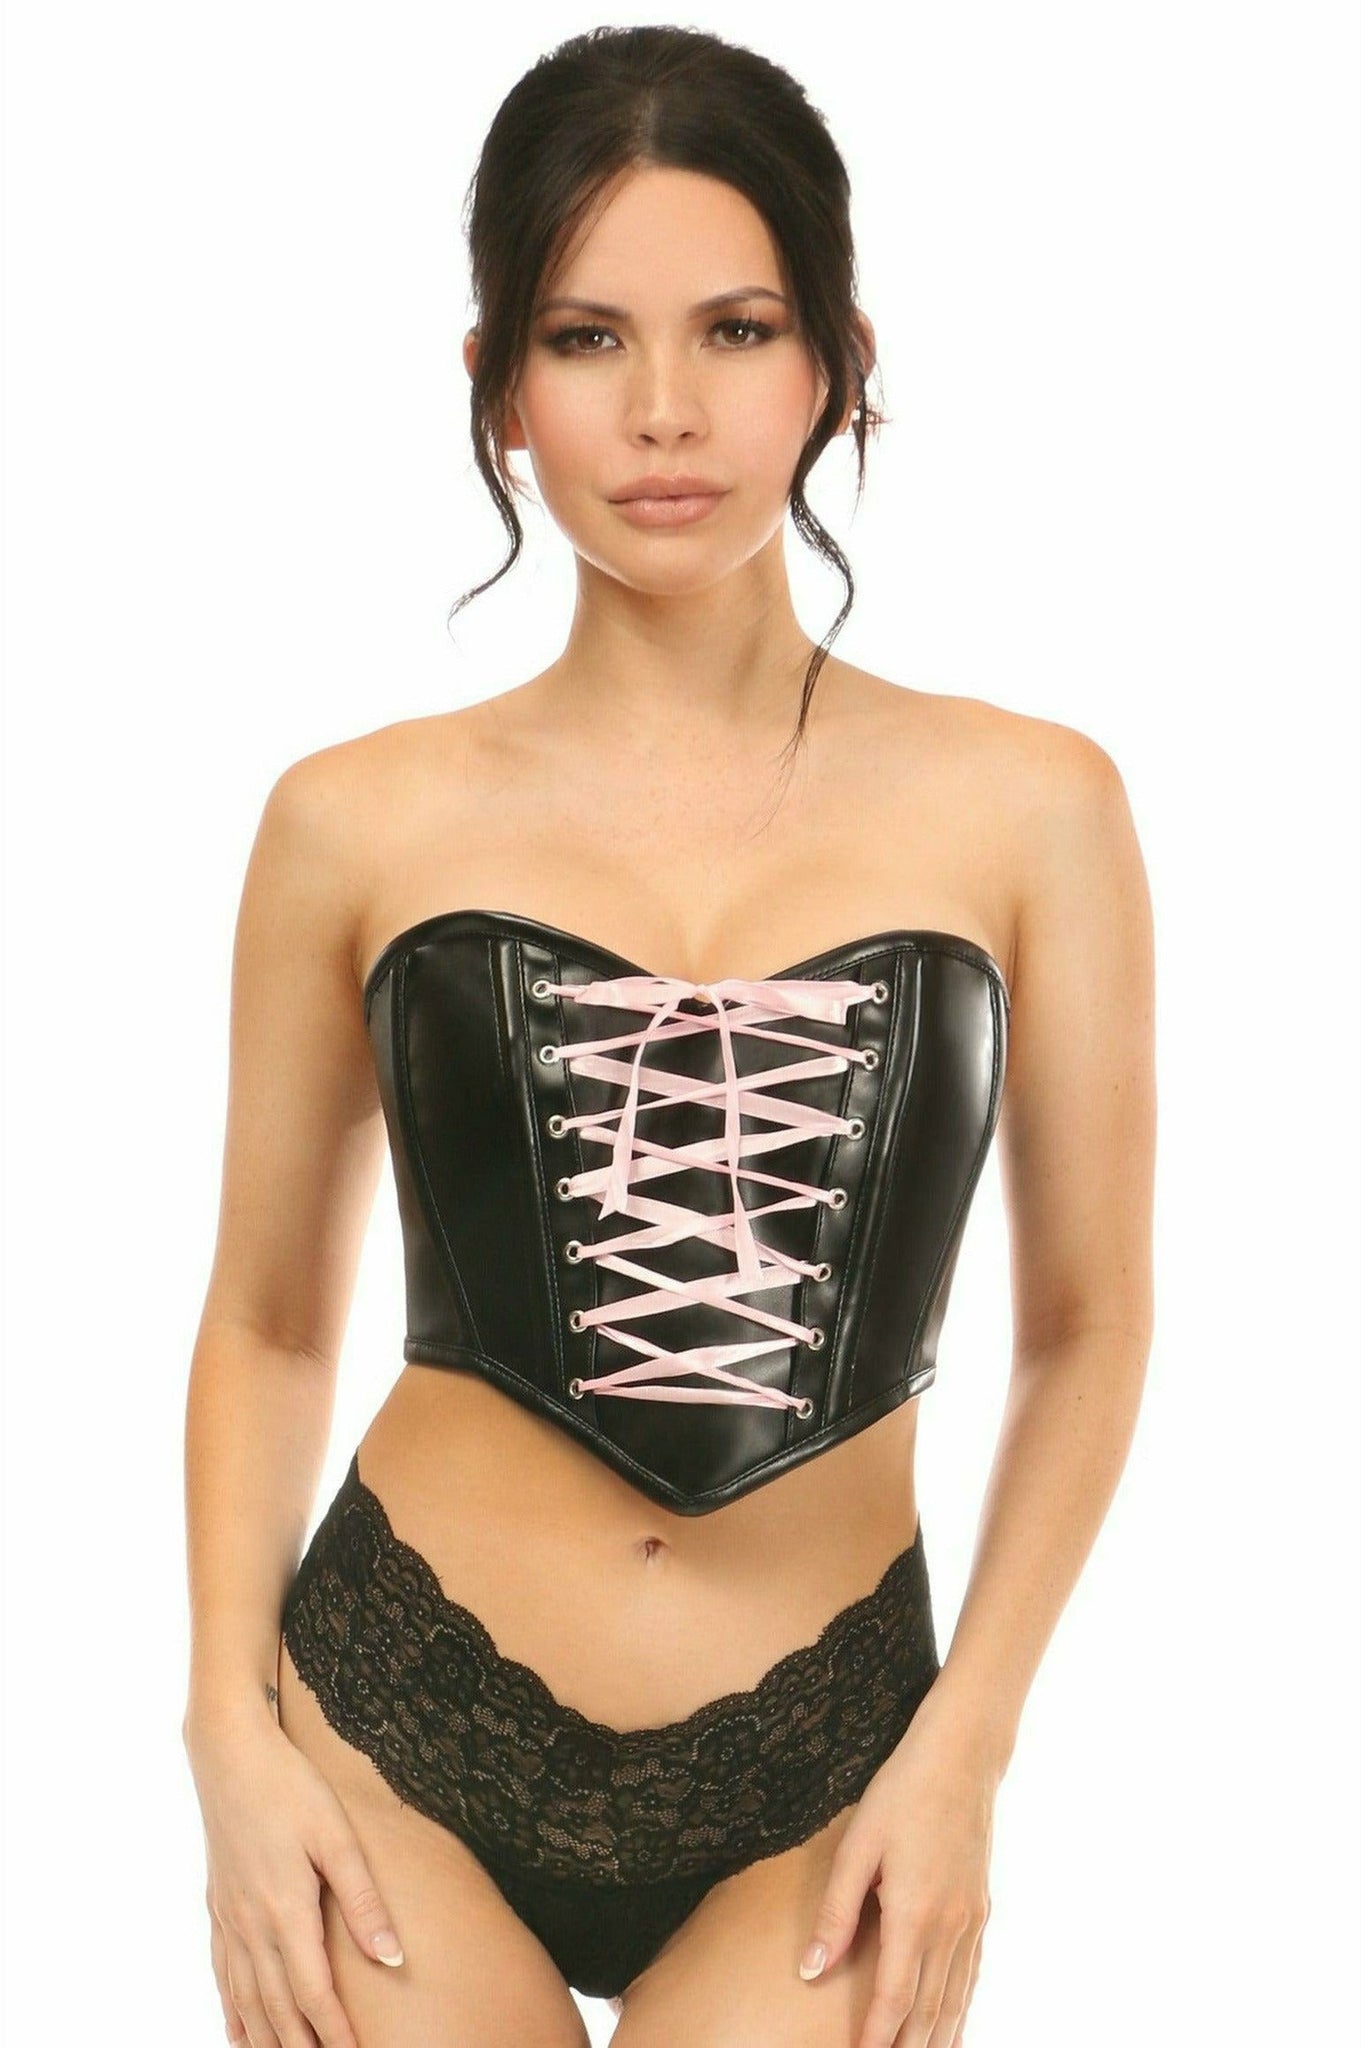 Faux Leather Lace Up Bustier by Daisy Corsets in 3 Color Choices in Size S, M, L, XL, 2X, 3X, 4X, 5X, or 6X